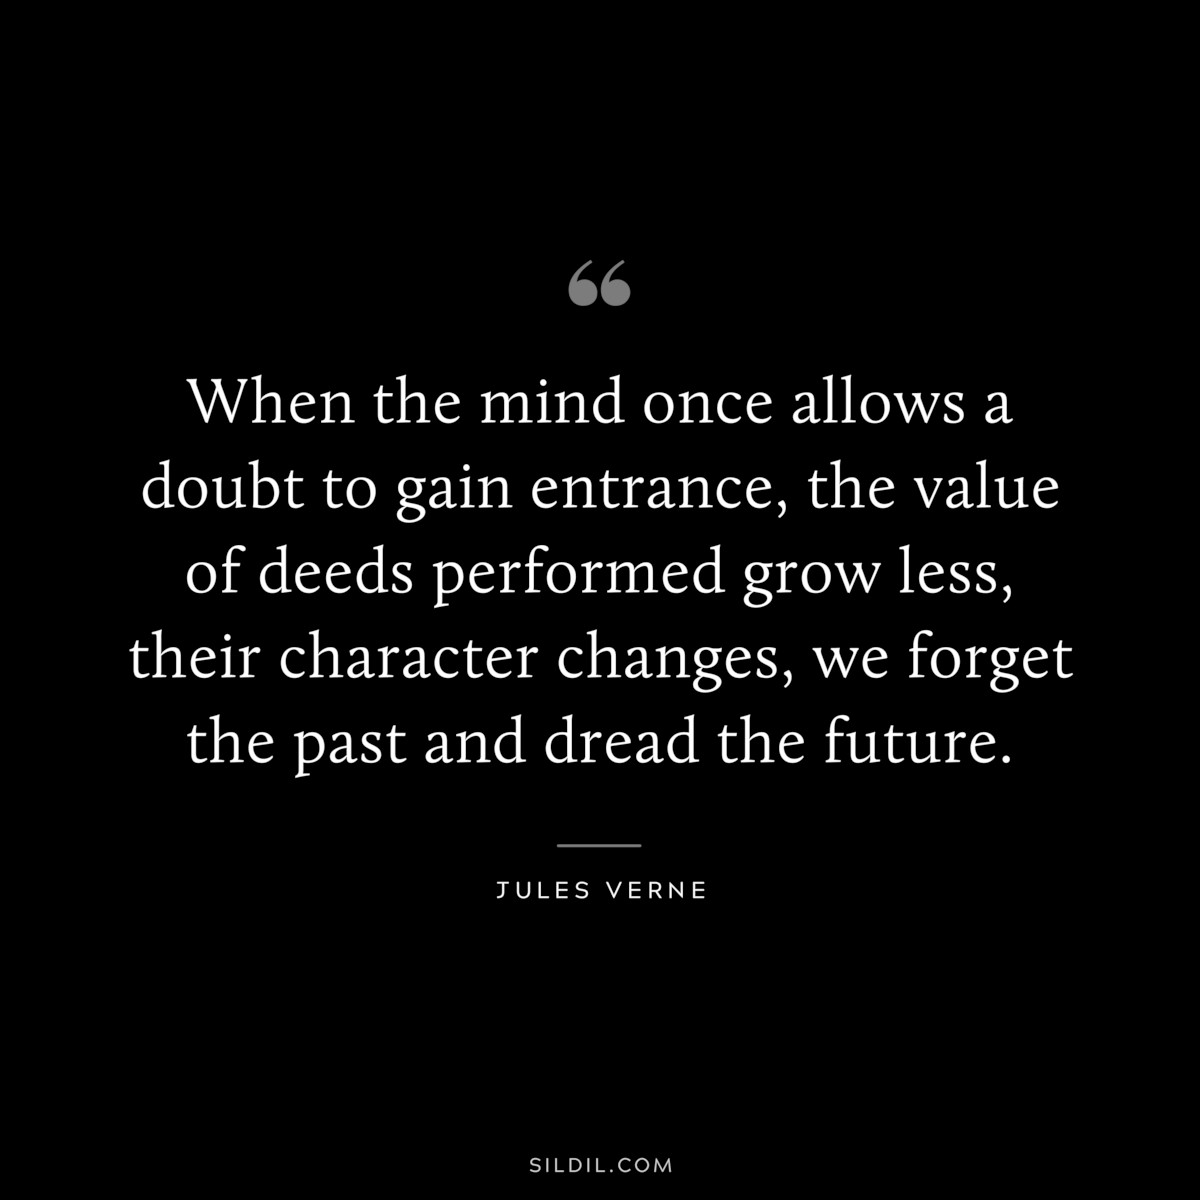 When the mind once allows a doubt to gain entrance, the value of deeds performed grow less, their character changes, we forget the past and dread the future.